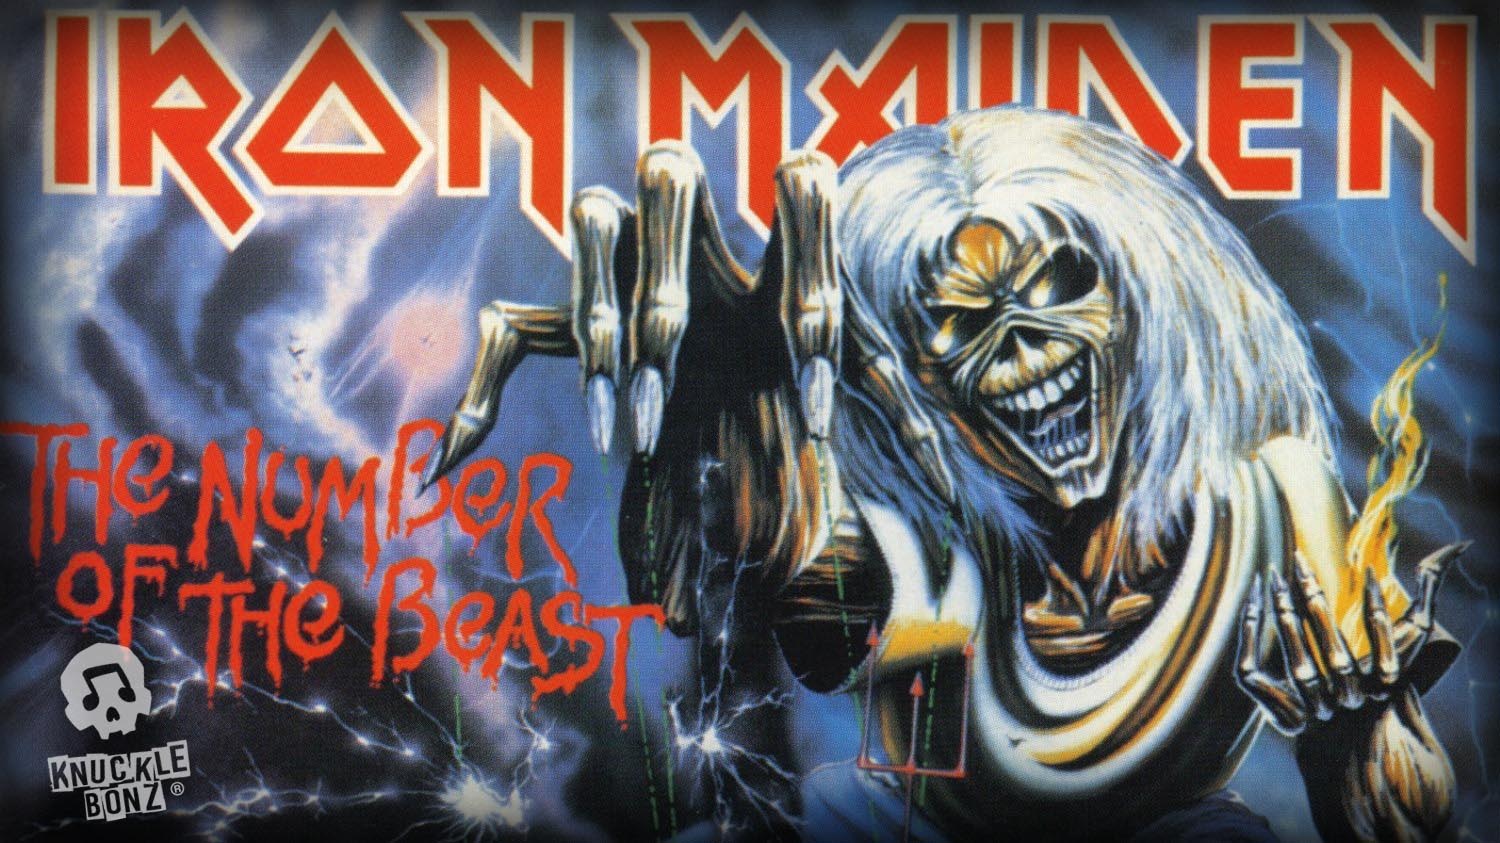 IRON MAIDEN Announce ‘The Number Of The Beast’ 40th-Anniversary Commemorative Retro-Cassette